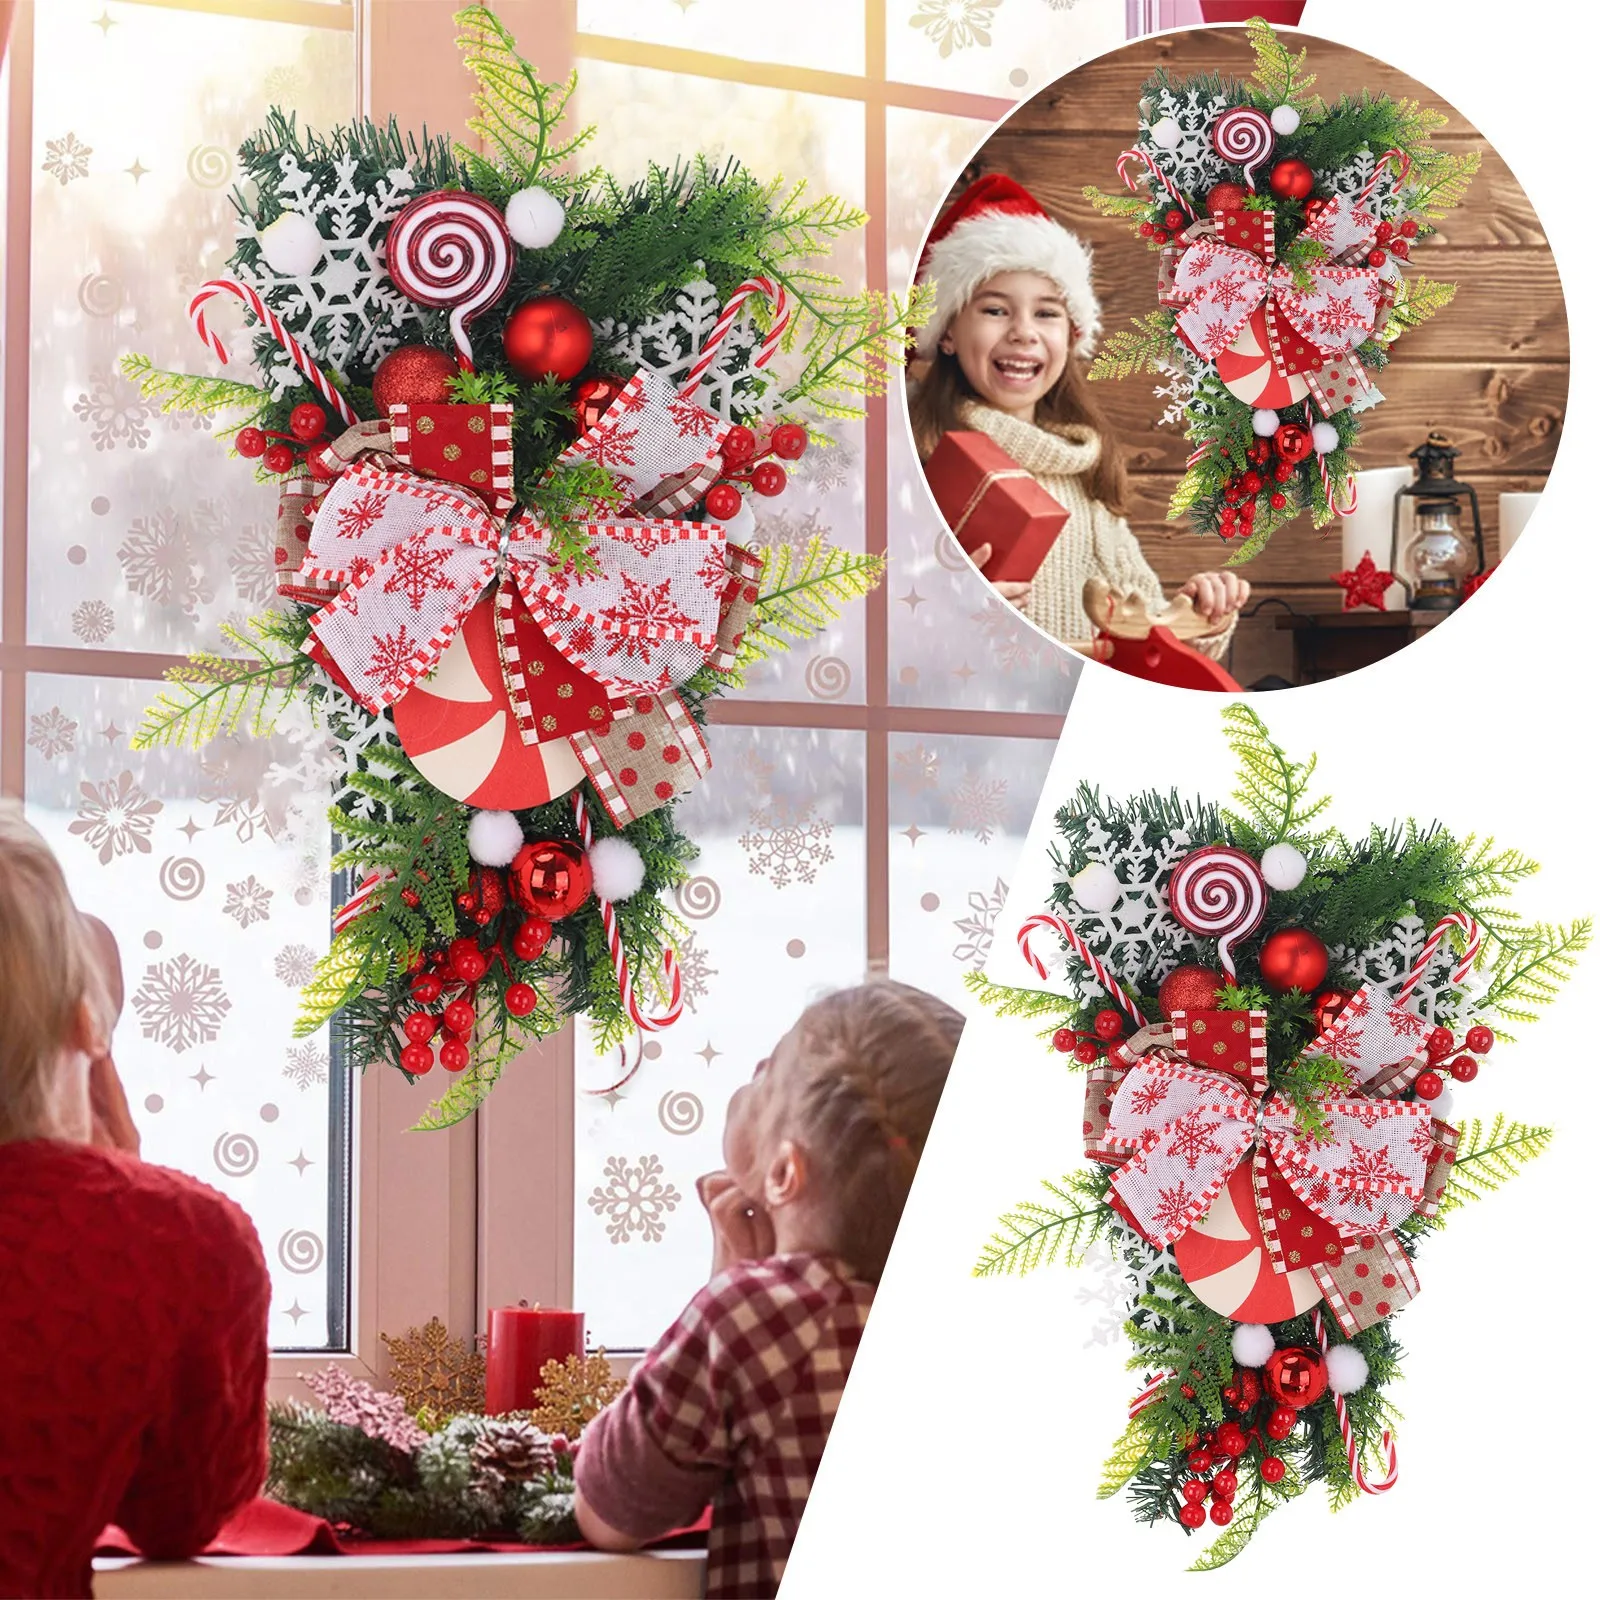 

Fall Front Door Wreath 2022 Candy Cane Wreath Christmas Decoration Artificial Pinees Cones Red Fall Wreath Hanger for Front Door